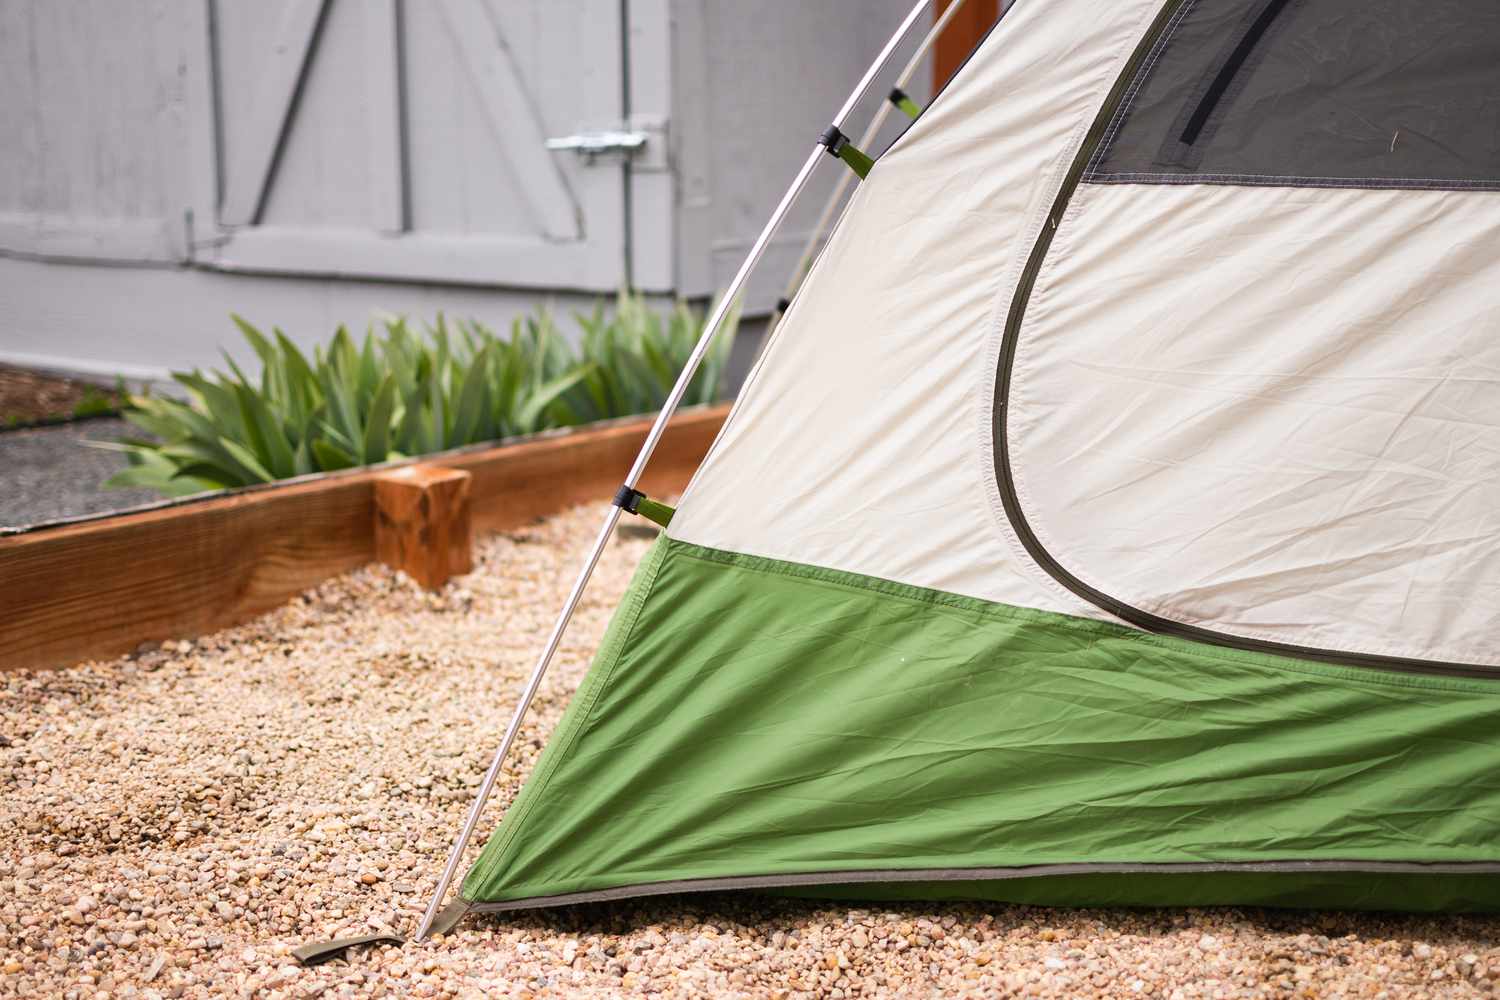 Green and cream-colored tent pitched to cleaning location